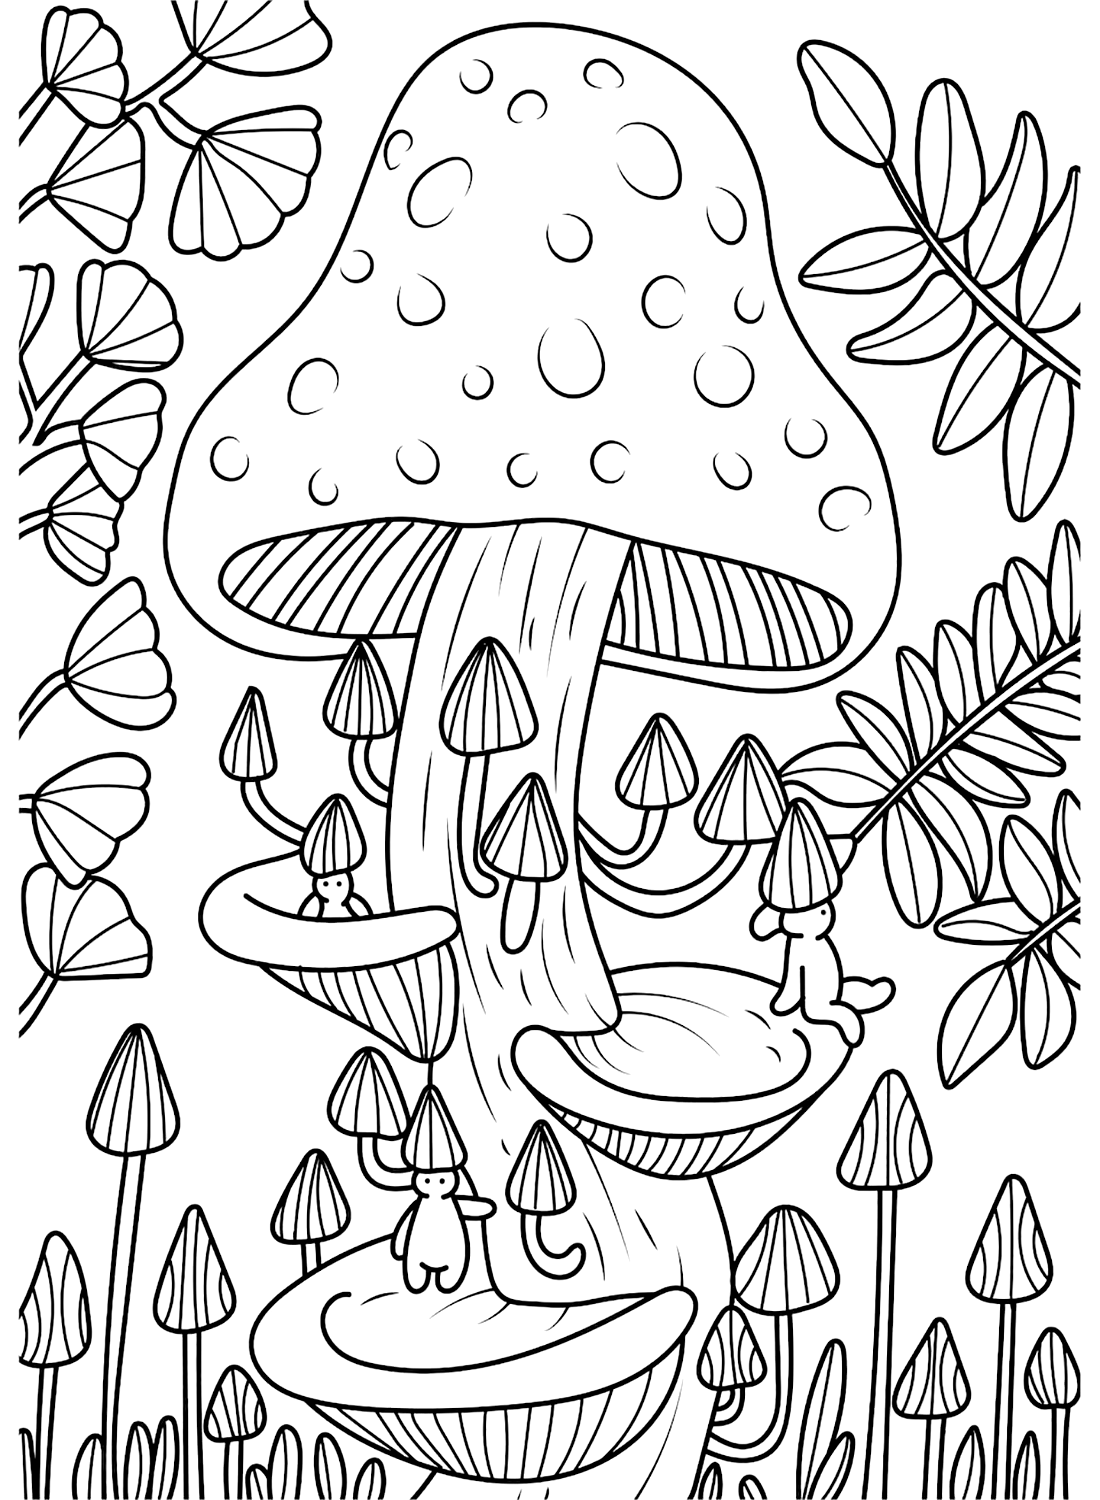 Mushroom Color Pages - Free Printable Coloring Pages